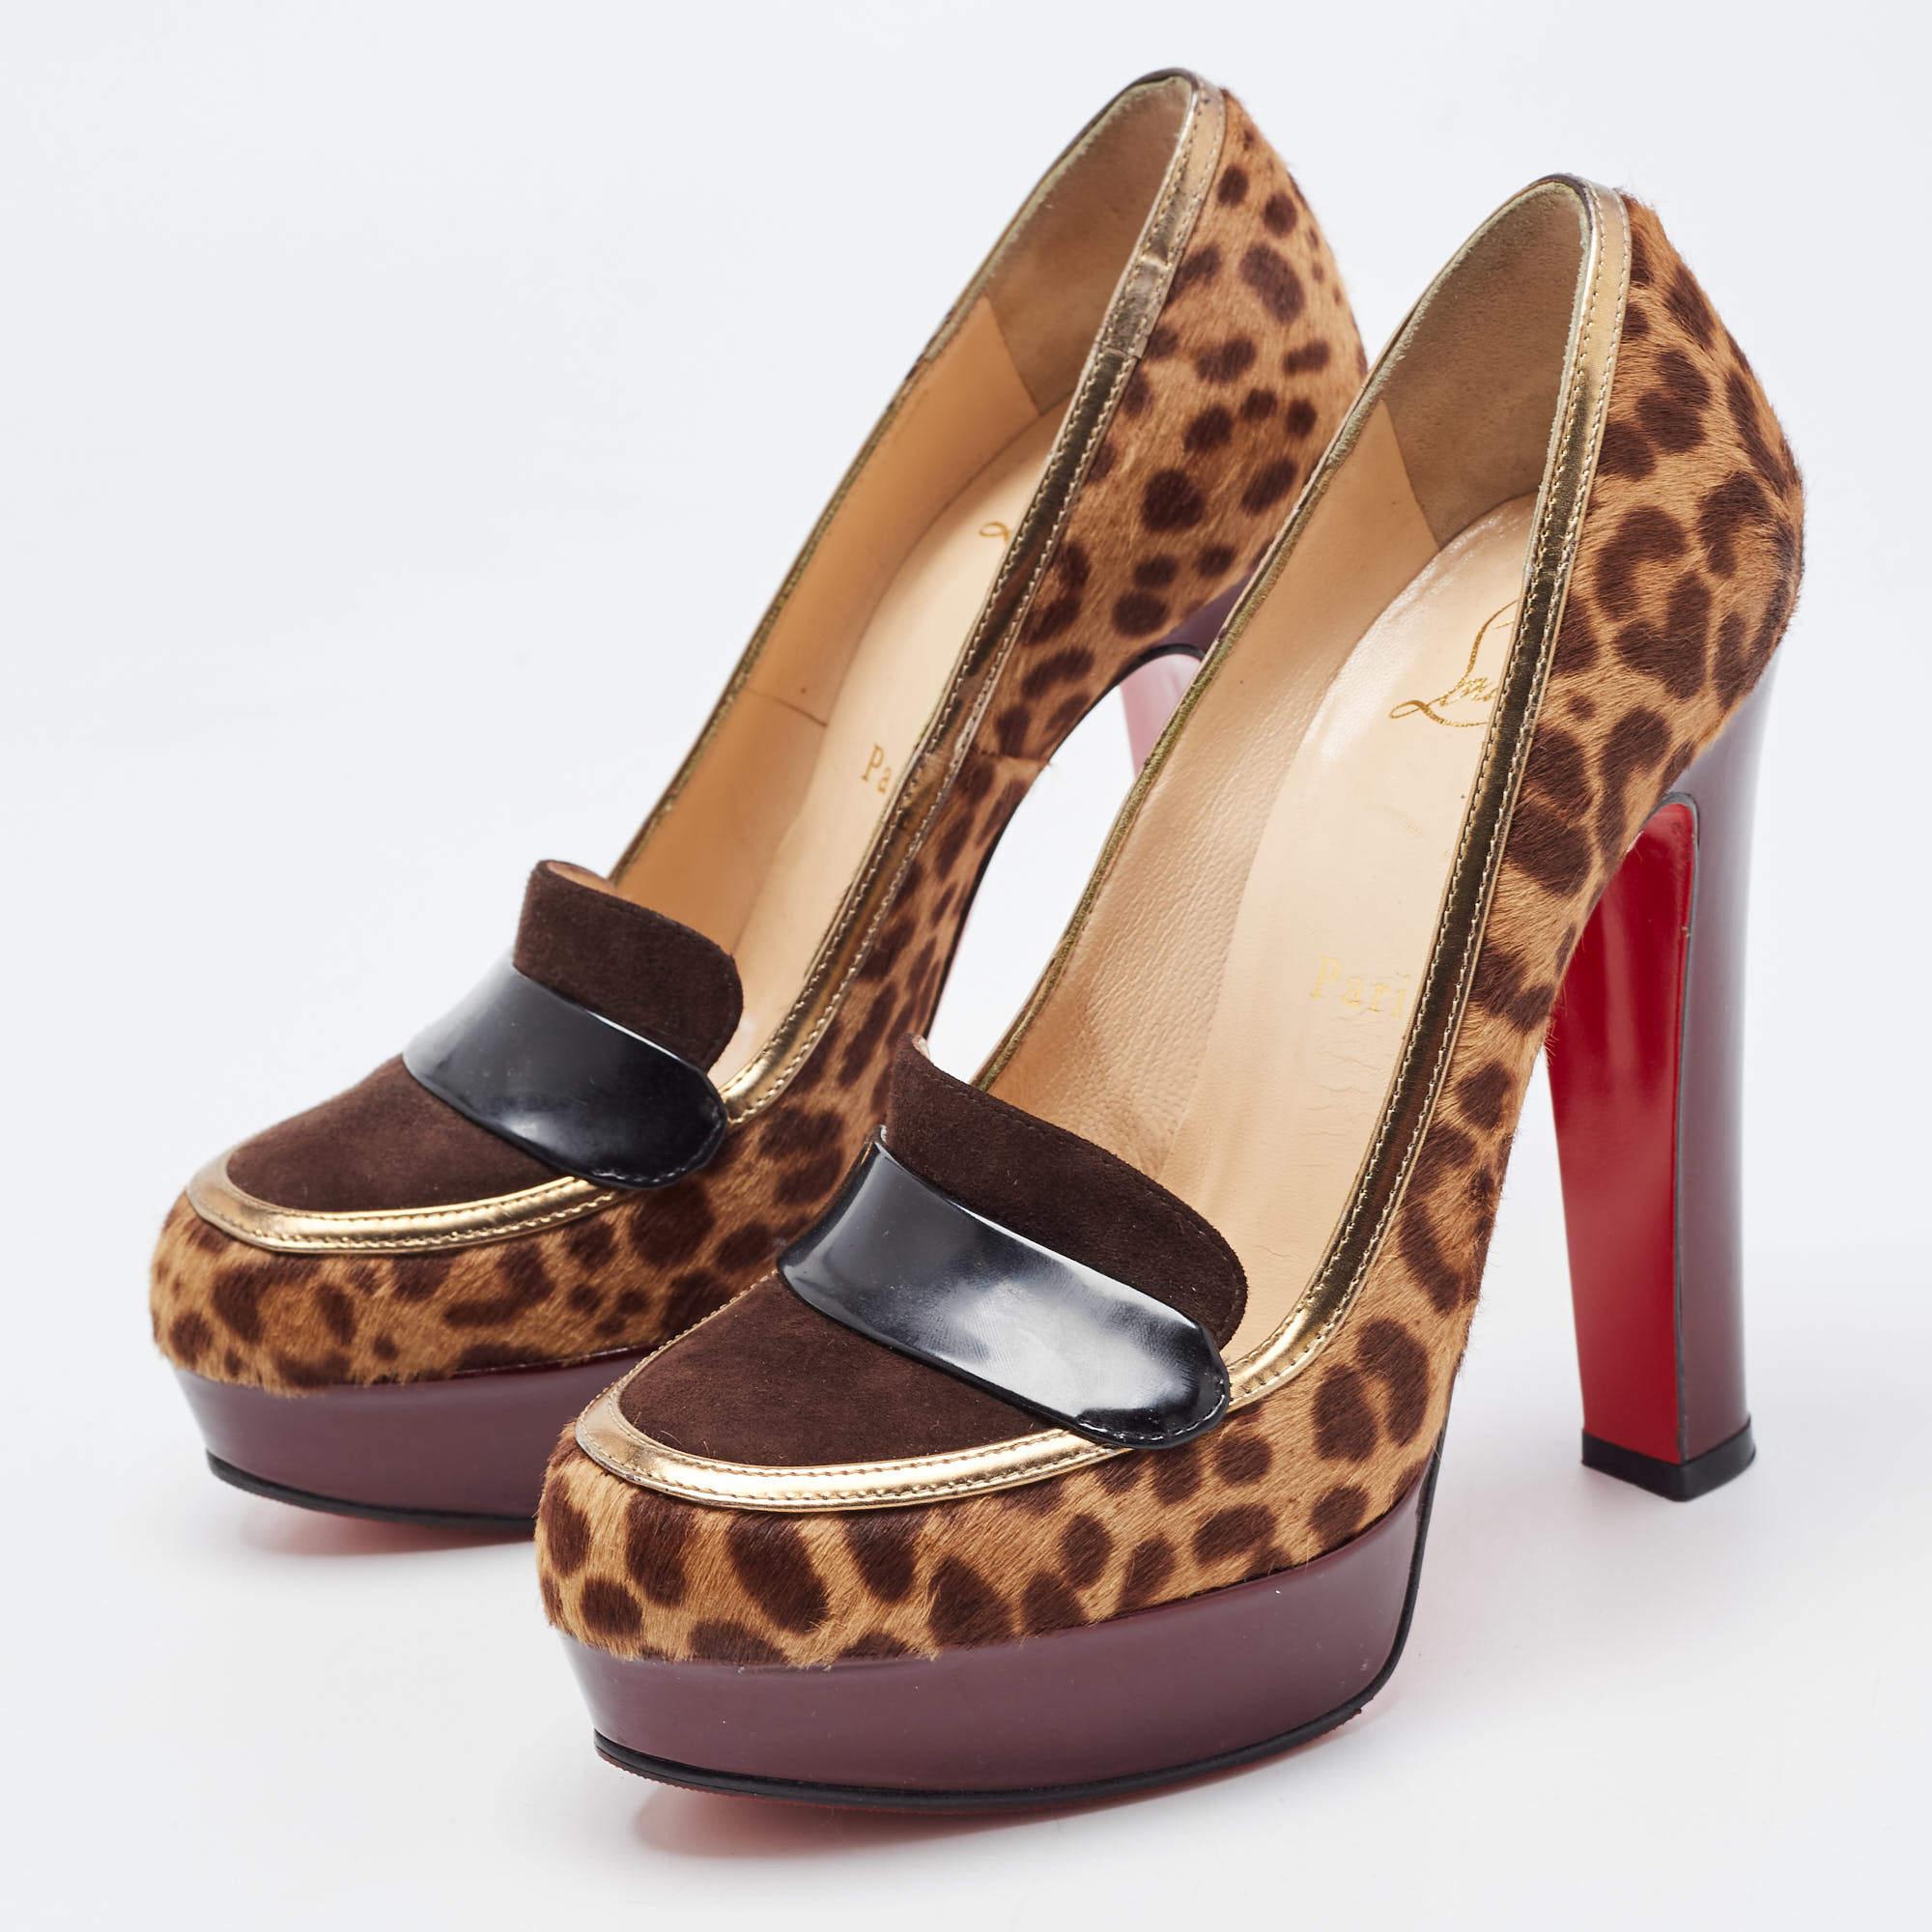 Women's Christian Louboutin Tricolor Animal Print Calf Hair Loafer Pumps Size 36 For Sale